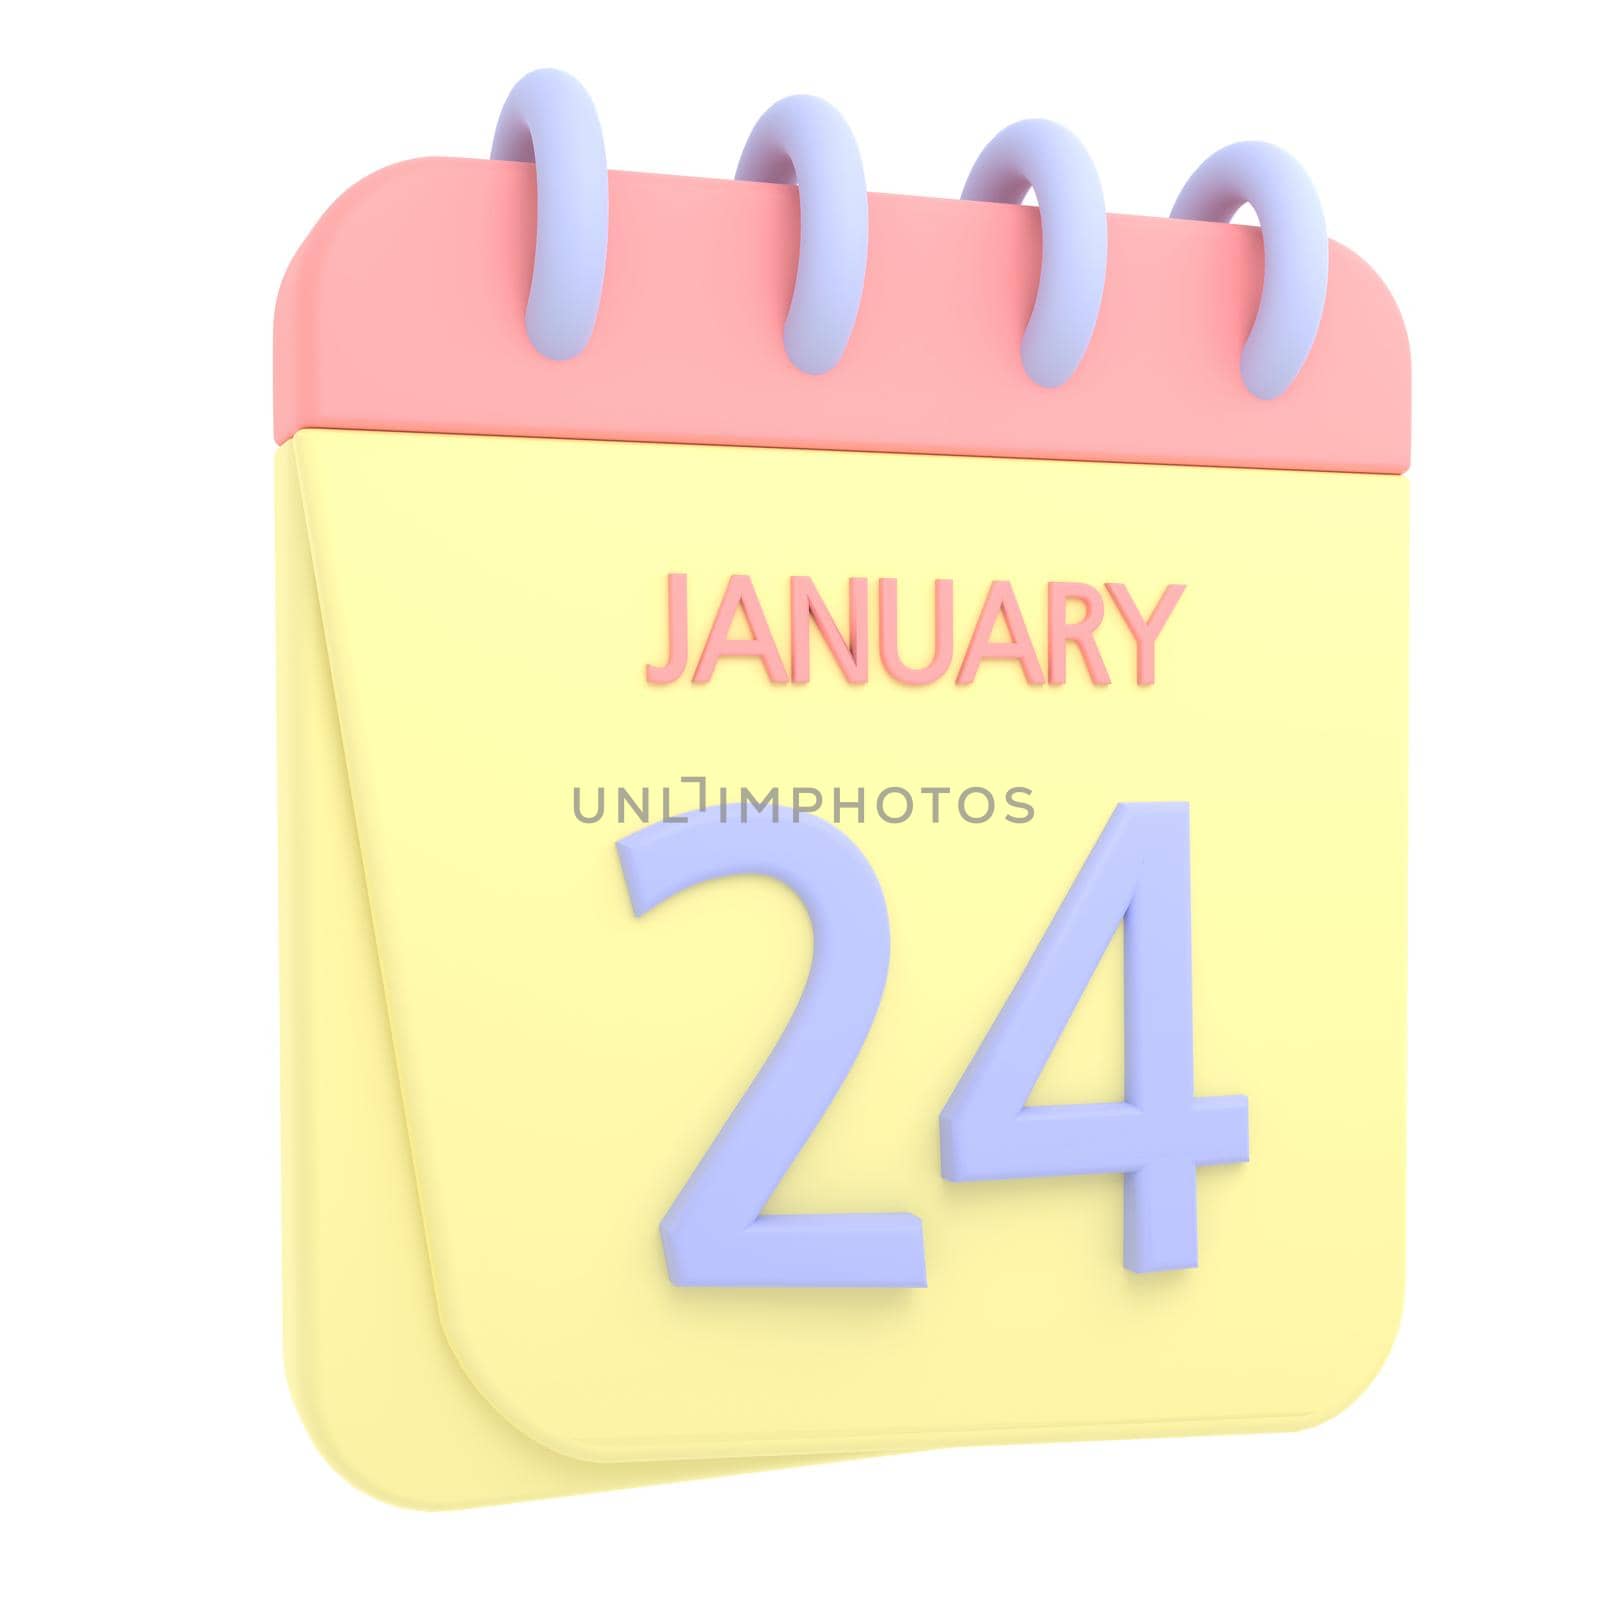 24th January 3D calendar icon. Web style. High resolution image. White background